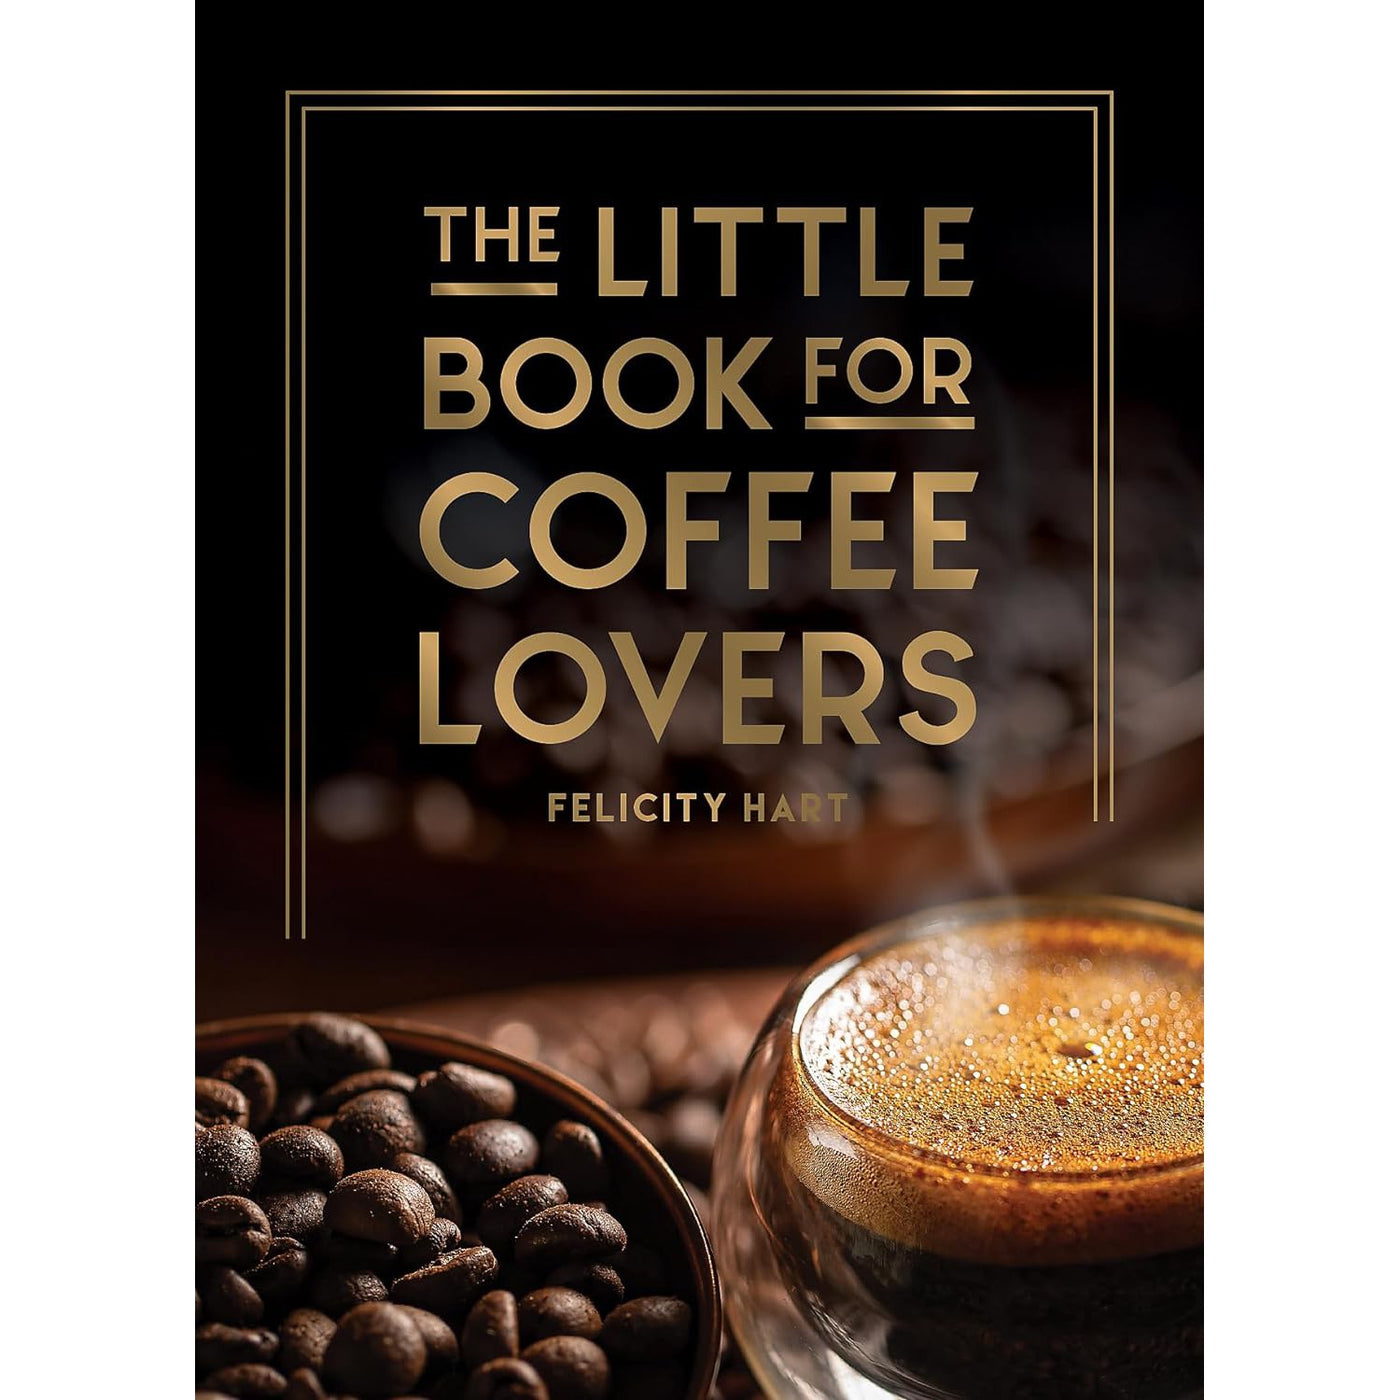 The Little Book For Coffee Lovers